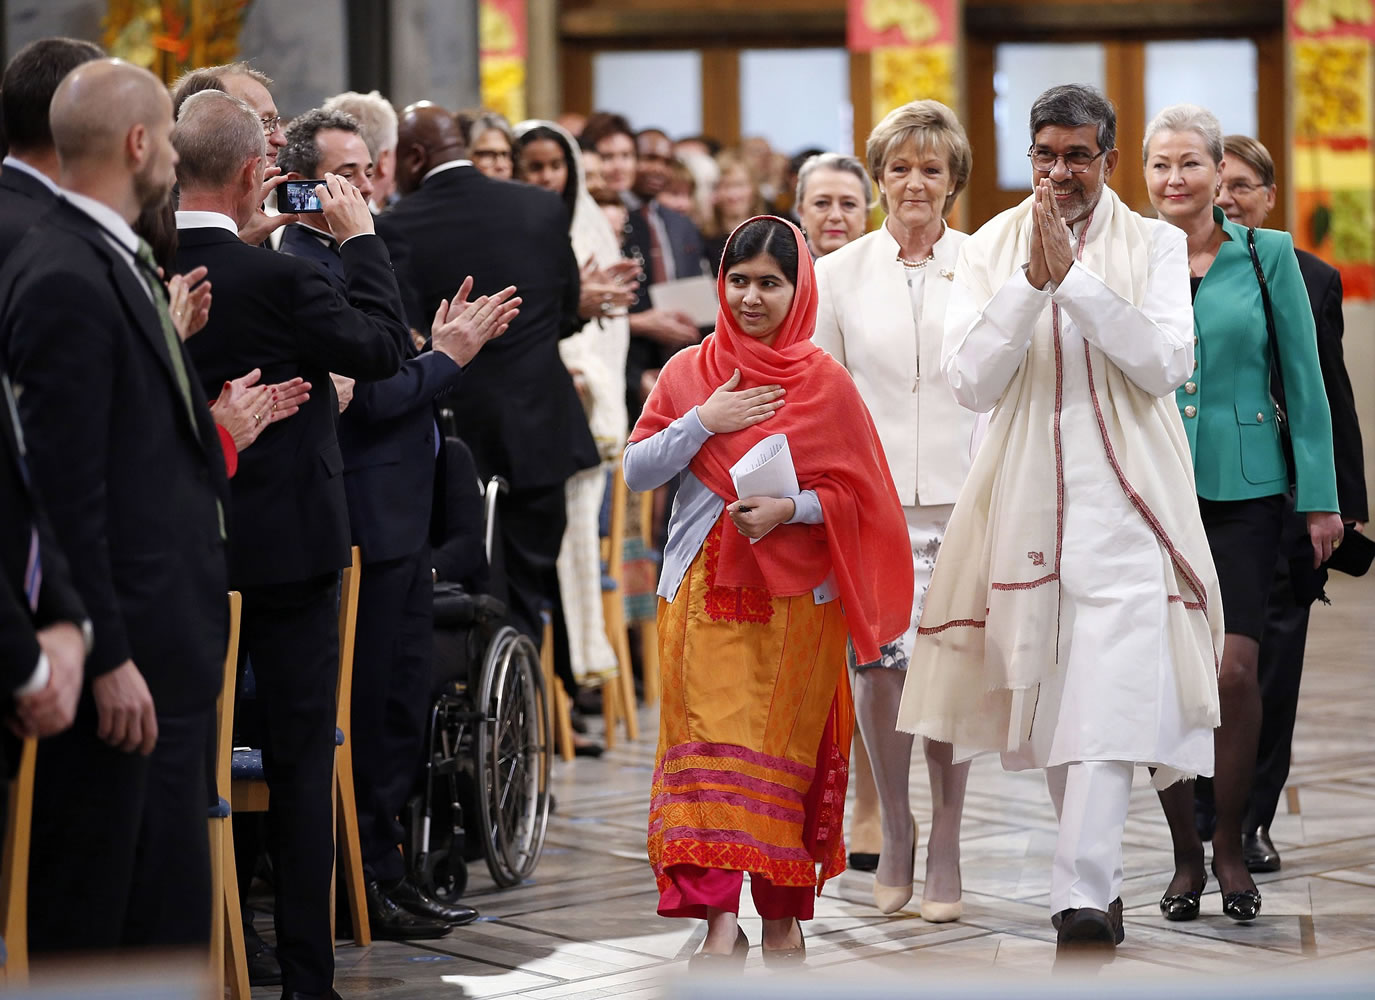 Nobel Peace Prize winners Malala Yousafzai, from Pakistan, center left, and Kailash Satyarthi, of India, arrive for the Nobel Peace Prize award ceremony in Oslo, Norway, on Wednesday.